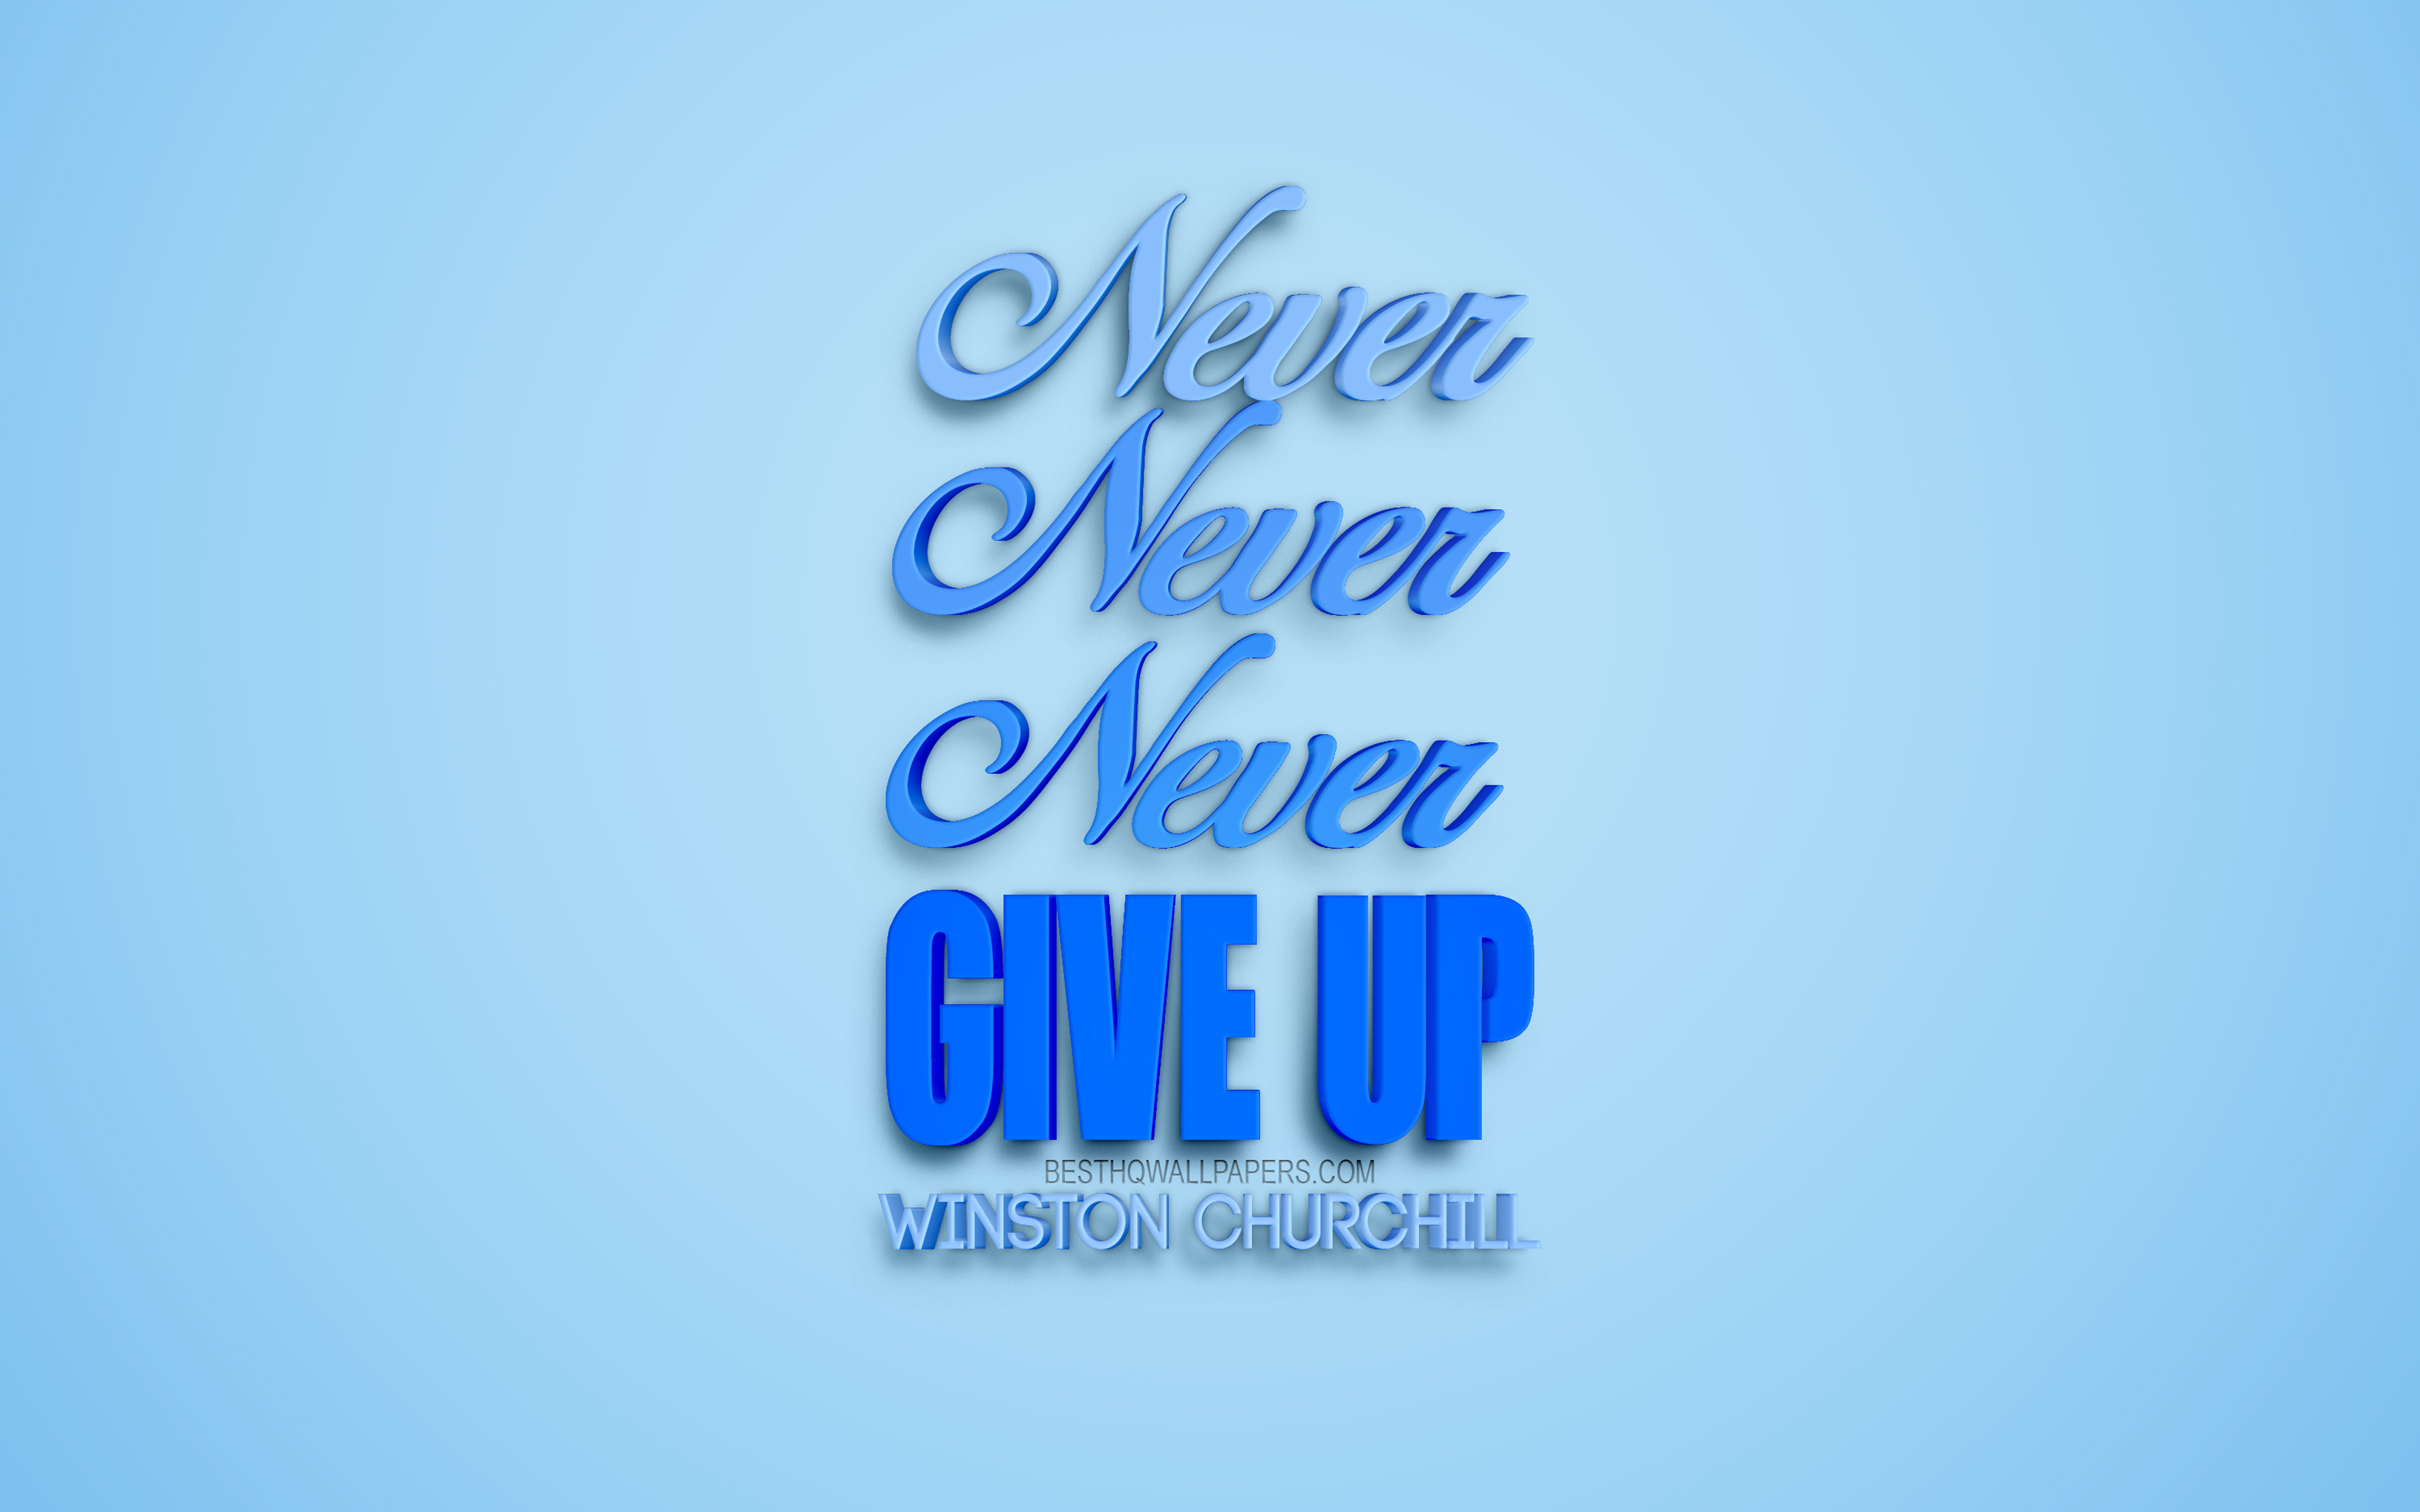 Never Never Never Give Up, Winston Churchill Quotes, - Calligraphy -  3840x2400 Wallpaper 